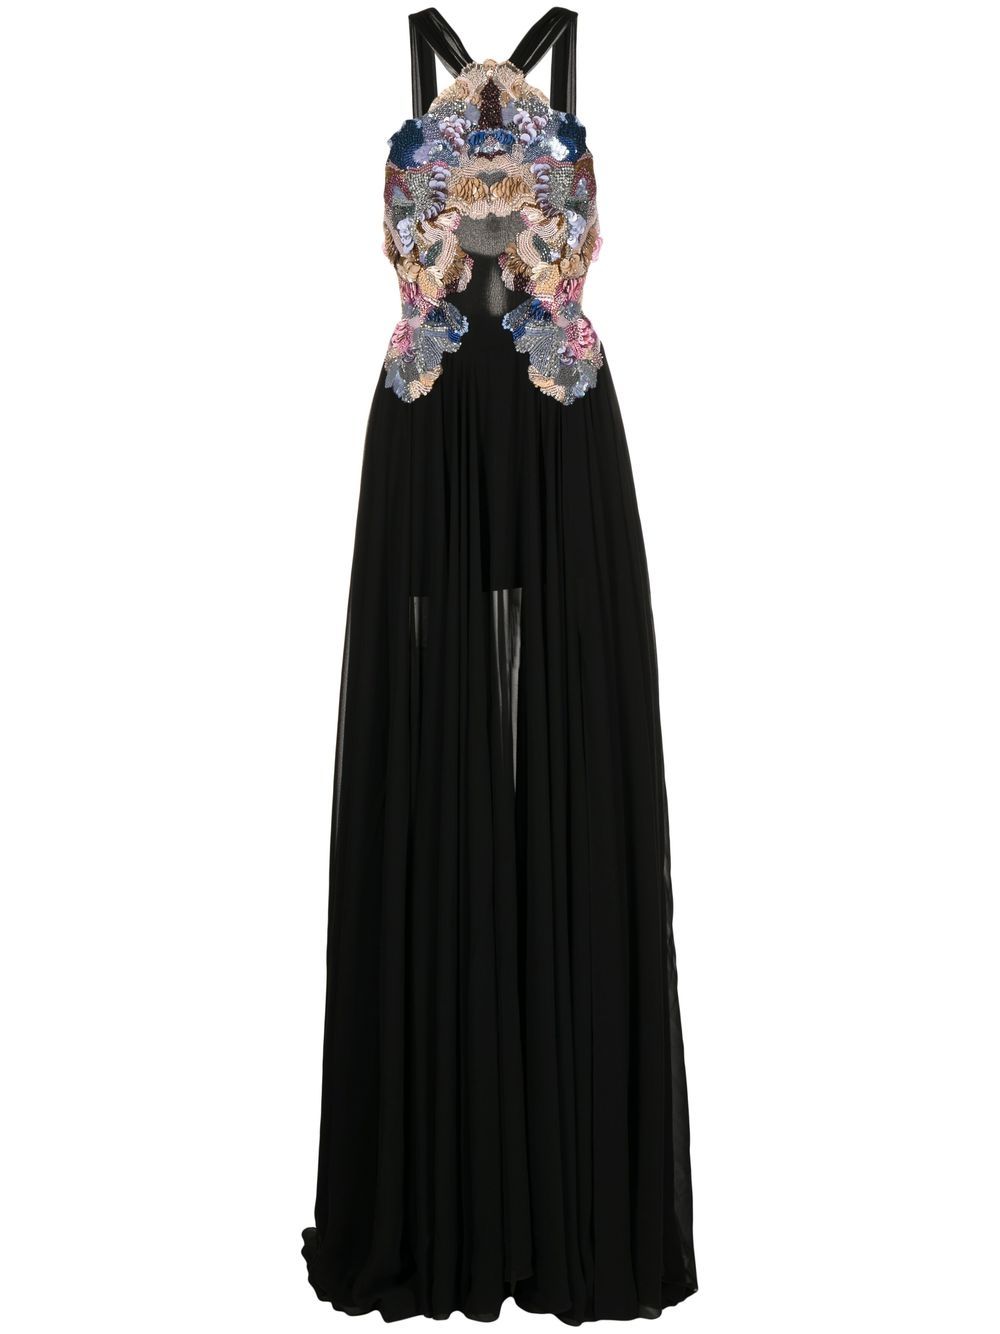 Saiid Kobeisy Crepe Georgette Gown With Chromatic Beading In Black